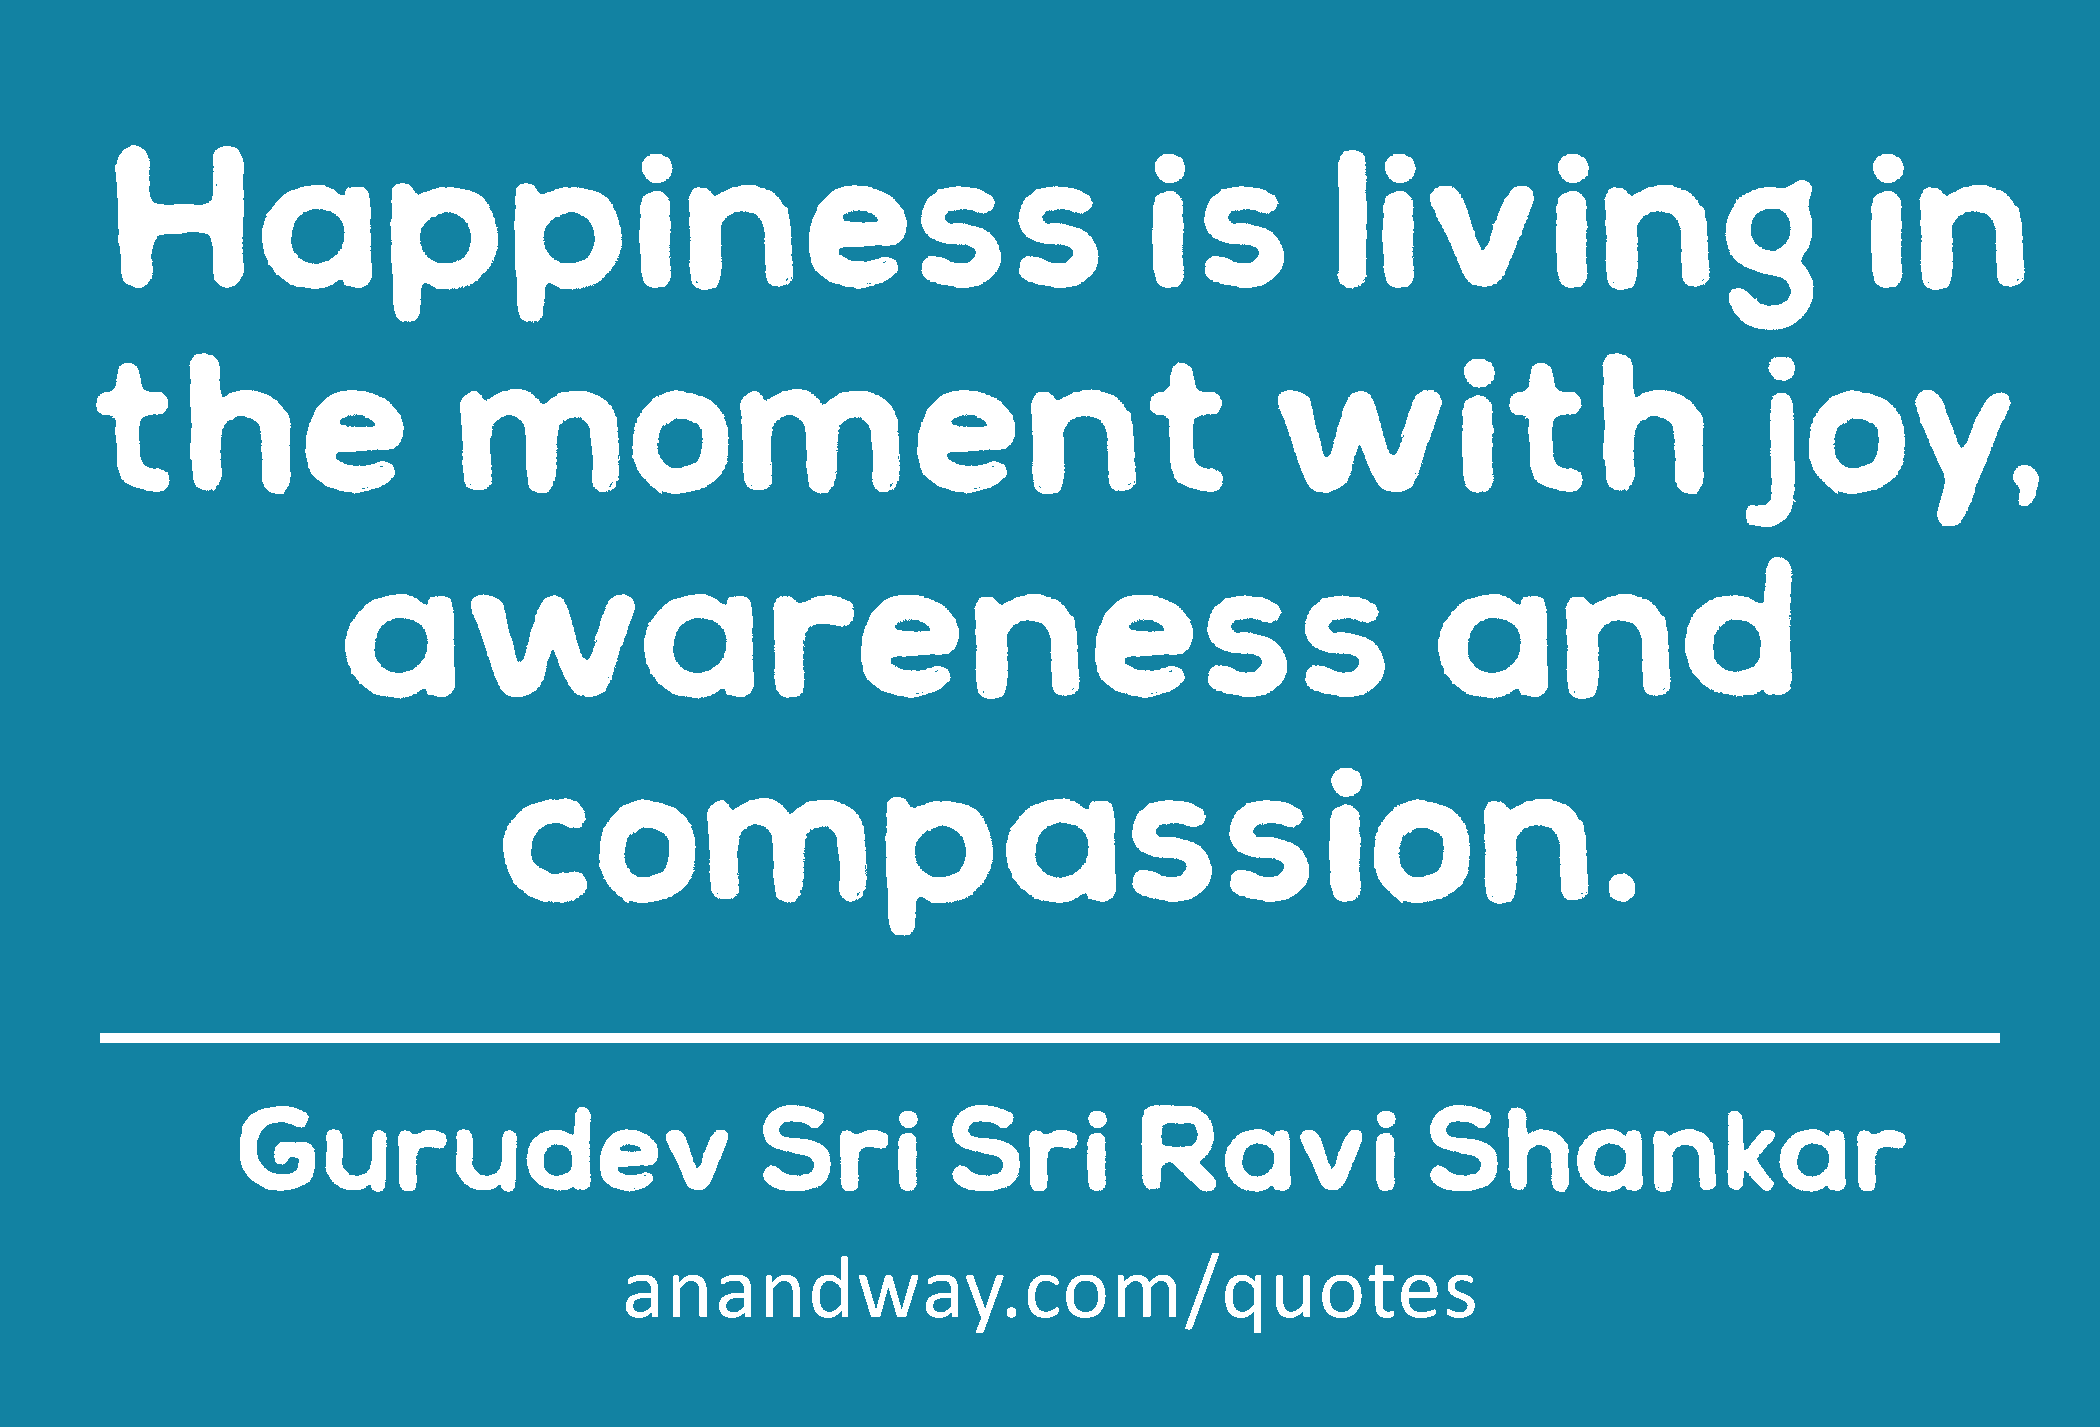 Happiness is living in the moment with joy, awareness and compassion. 
 -Gurudev Sri Sri Ravi Shankar